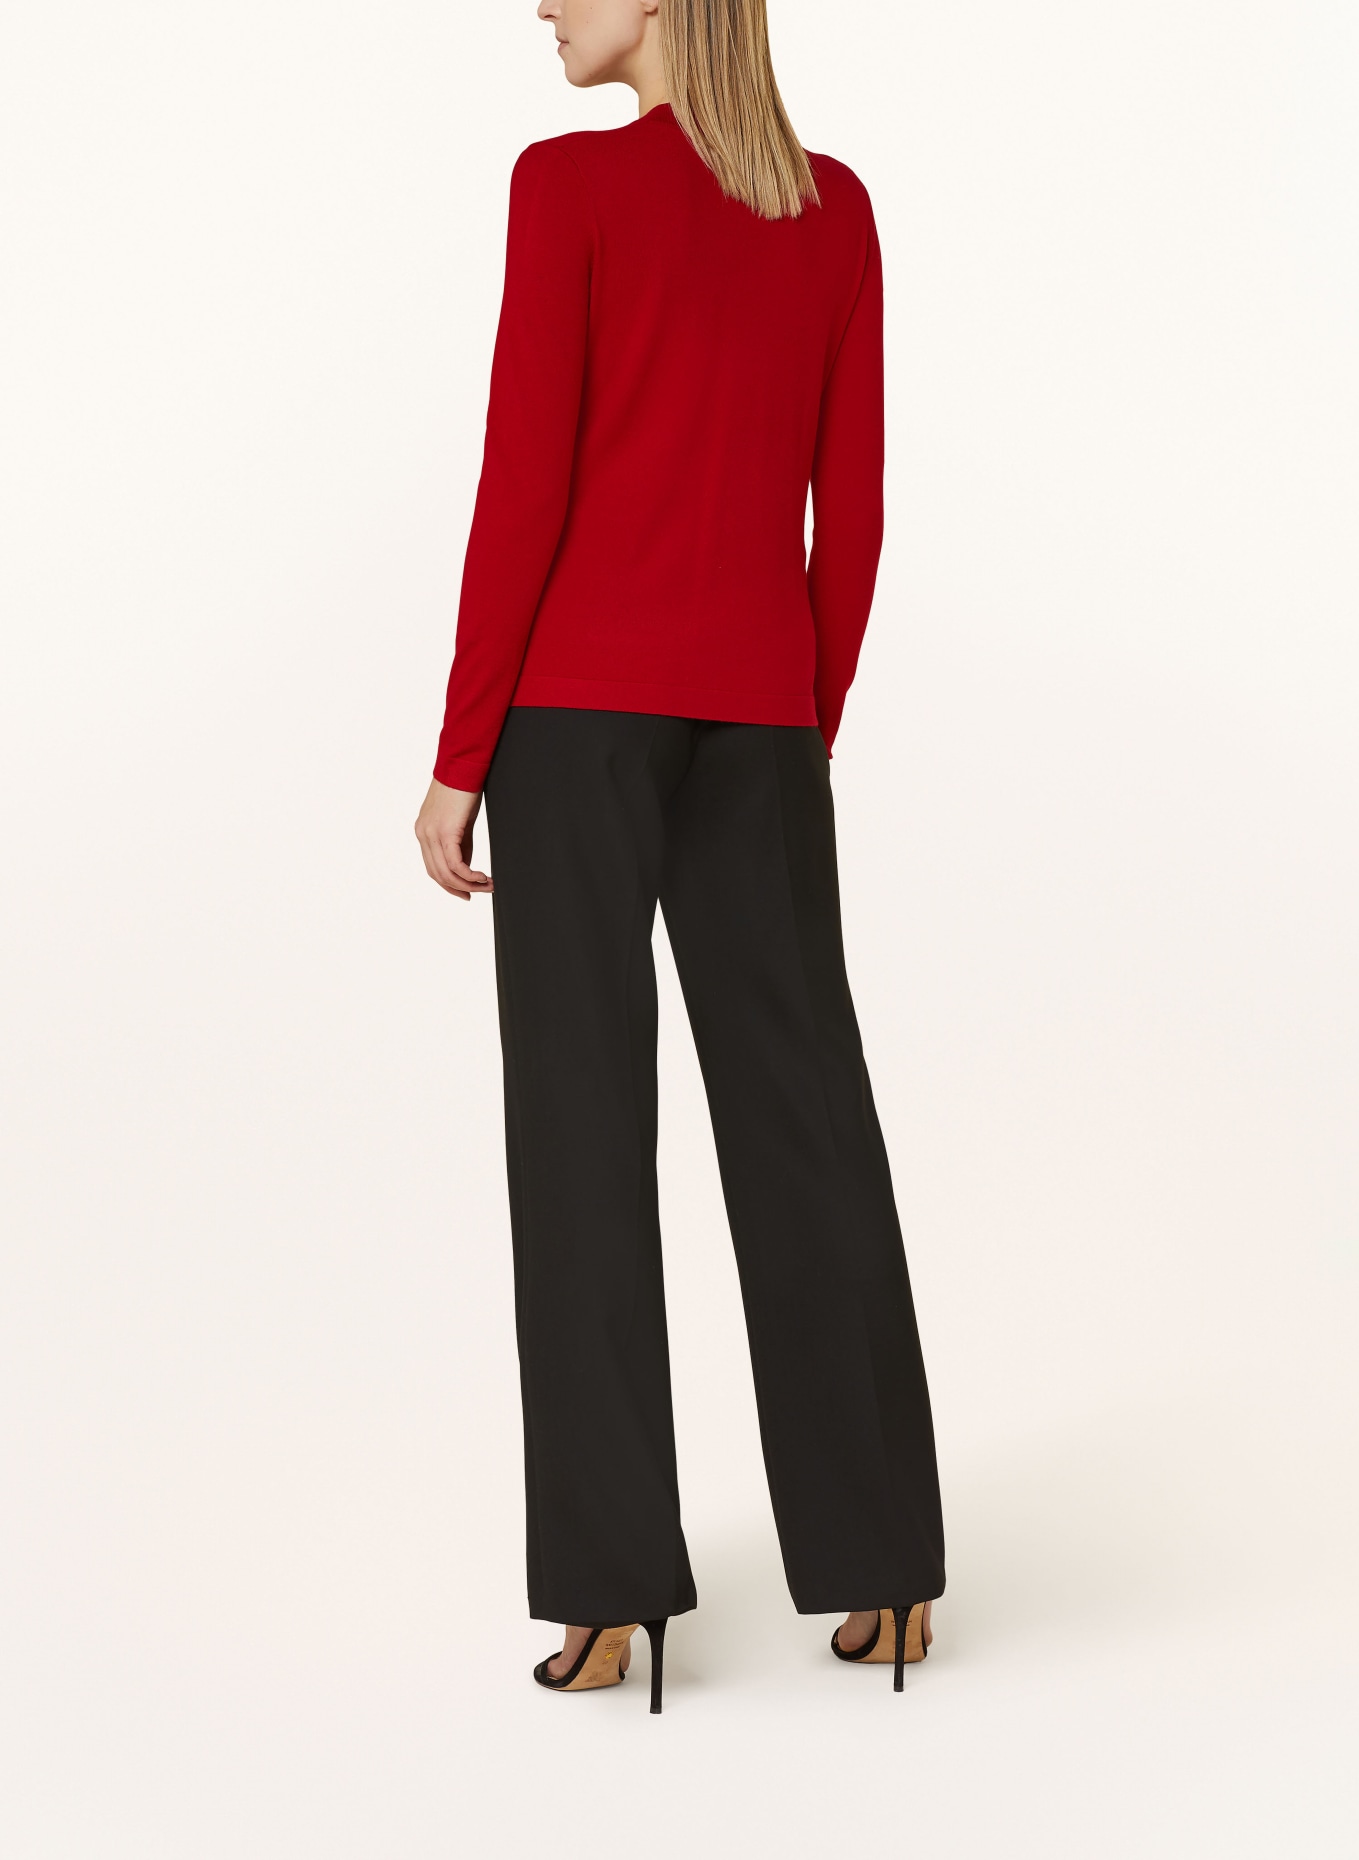 HOBBS Sweater EFFIE with cut-out, Color: RED (Image 3)